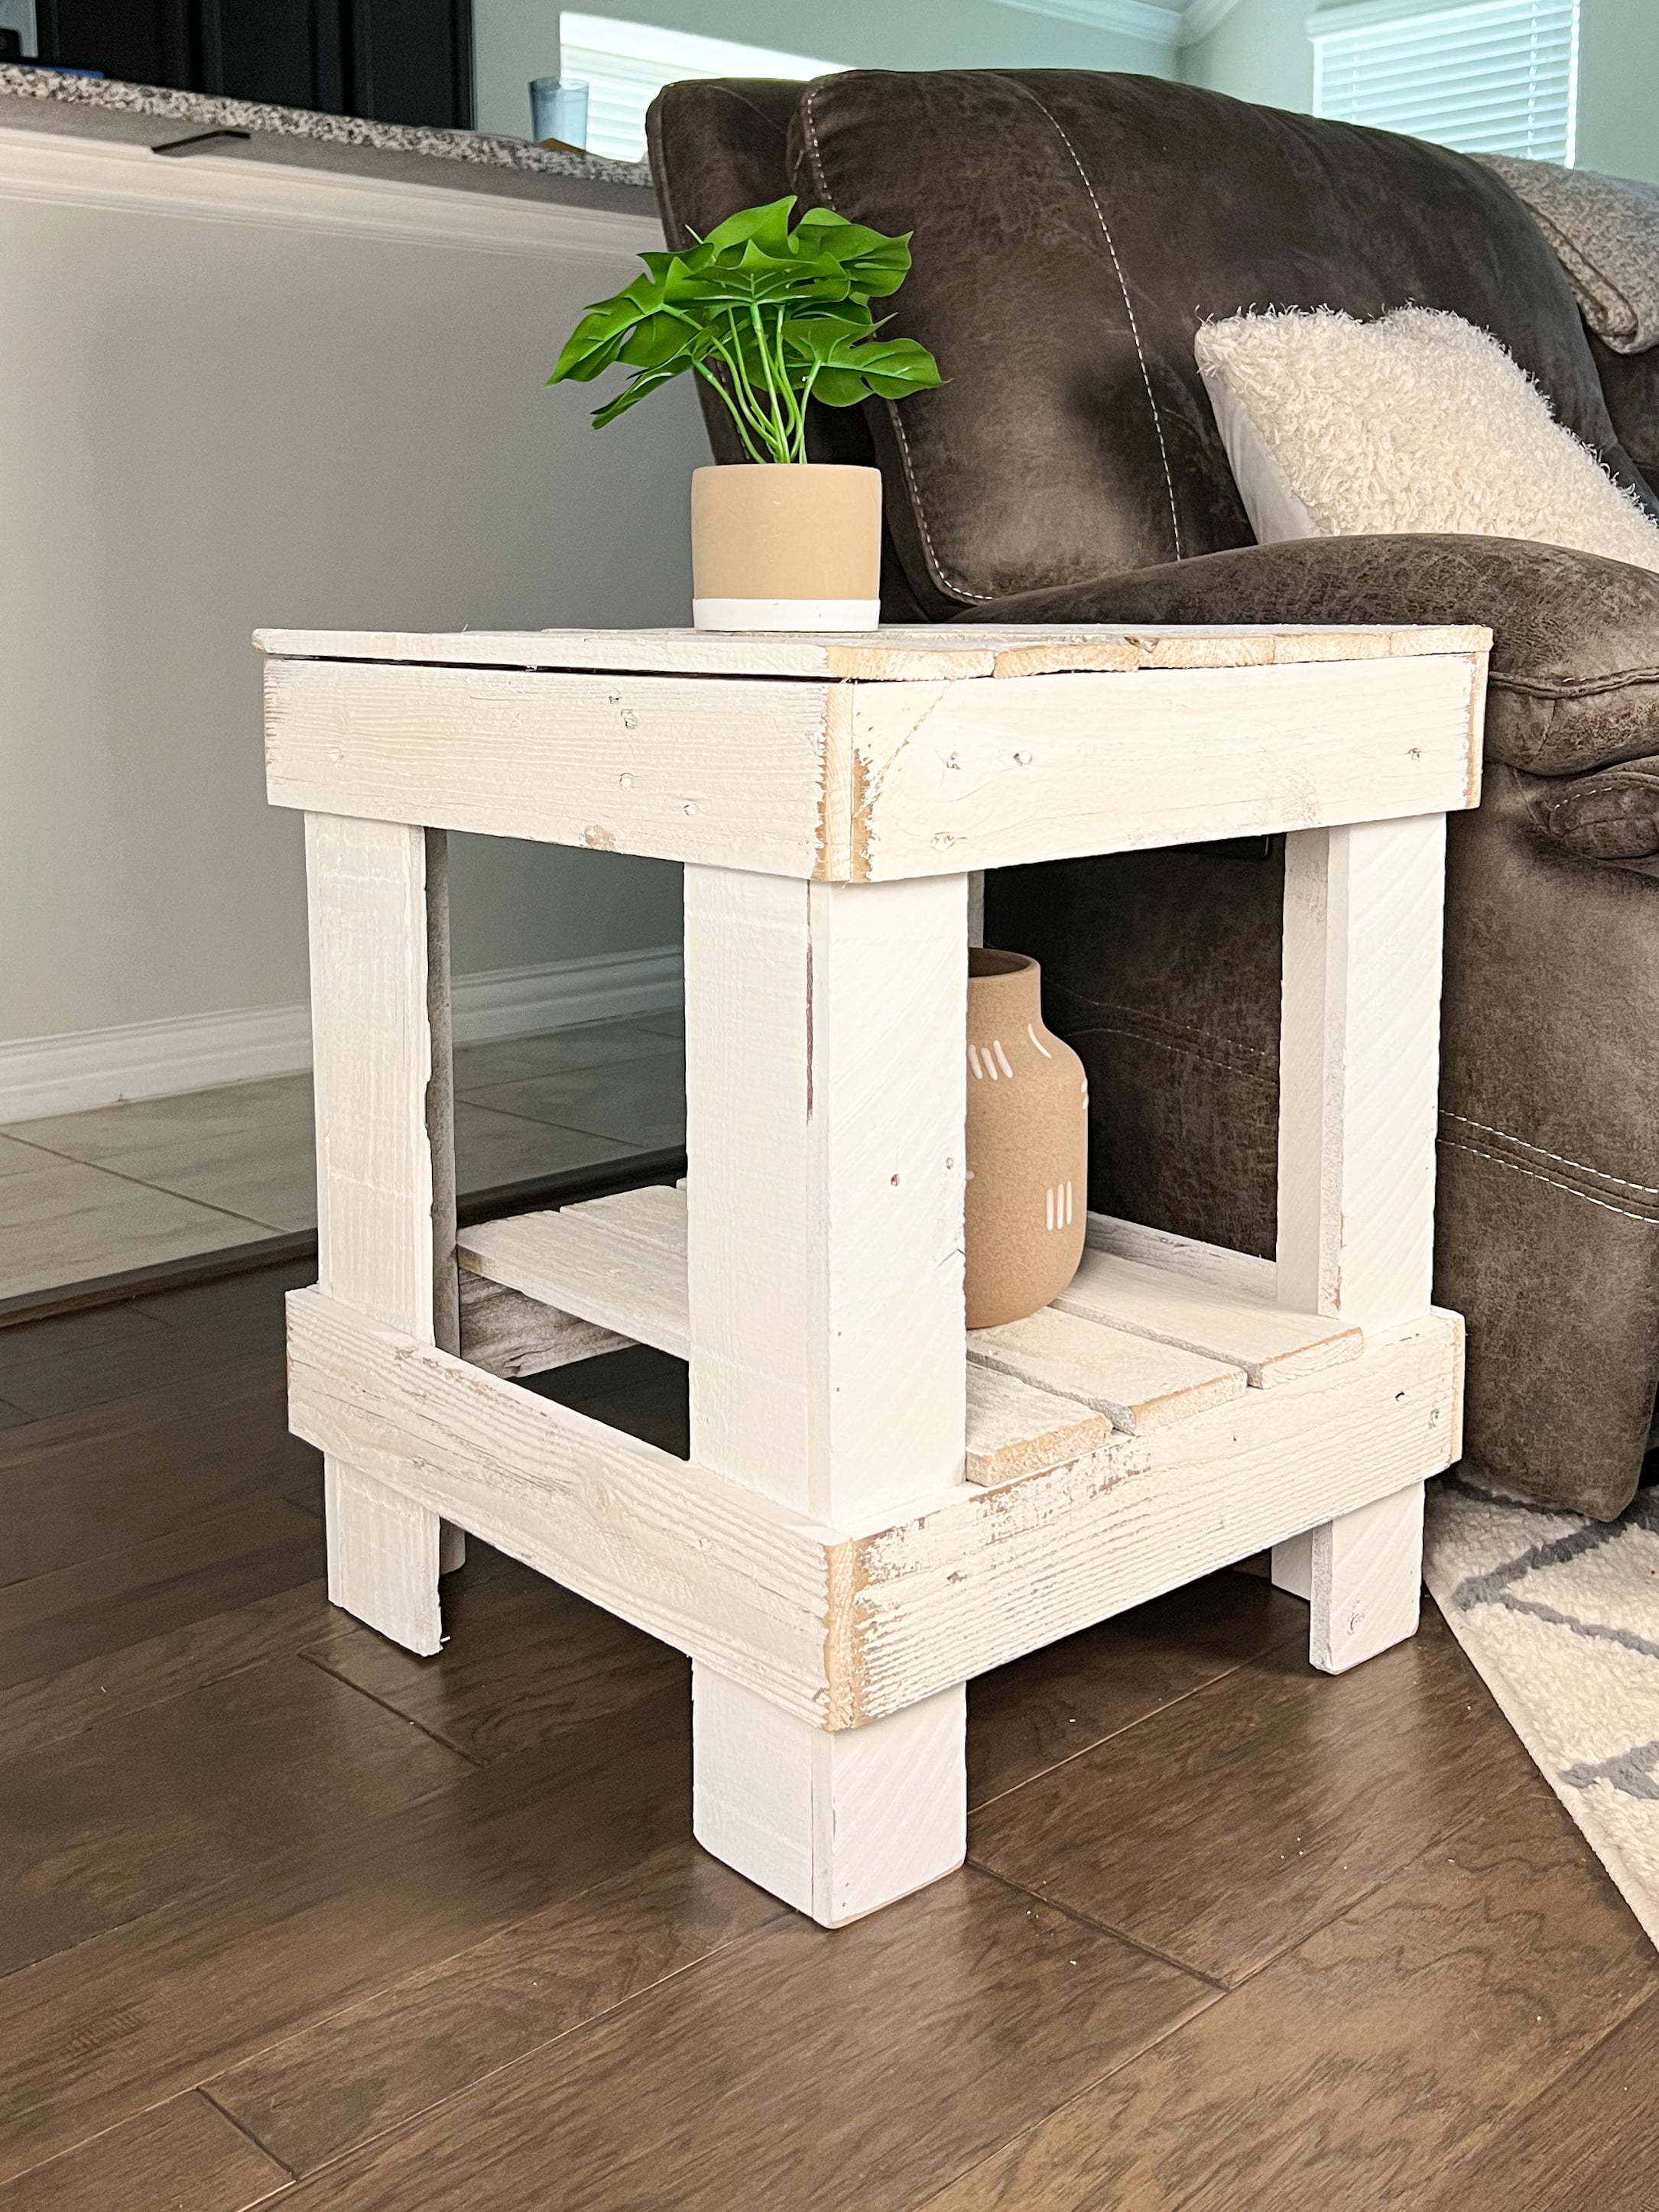 Details about   Rustic Barnwood Side Table Display Stand Reclaimed Look Distressed White/Brown 